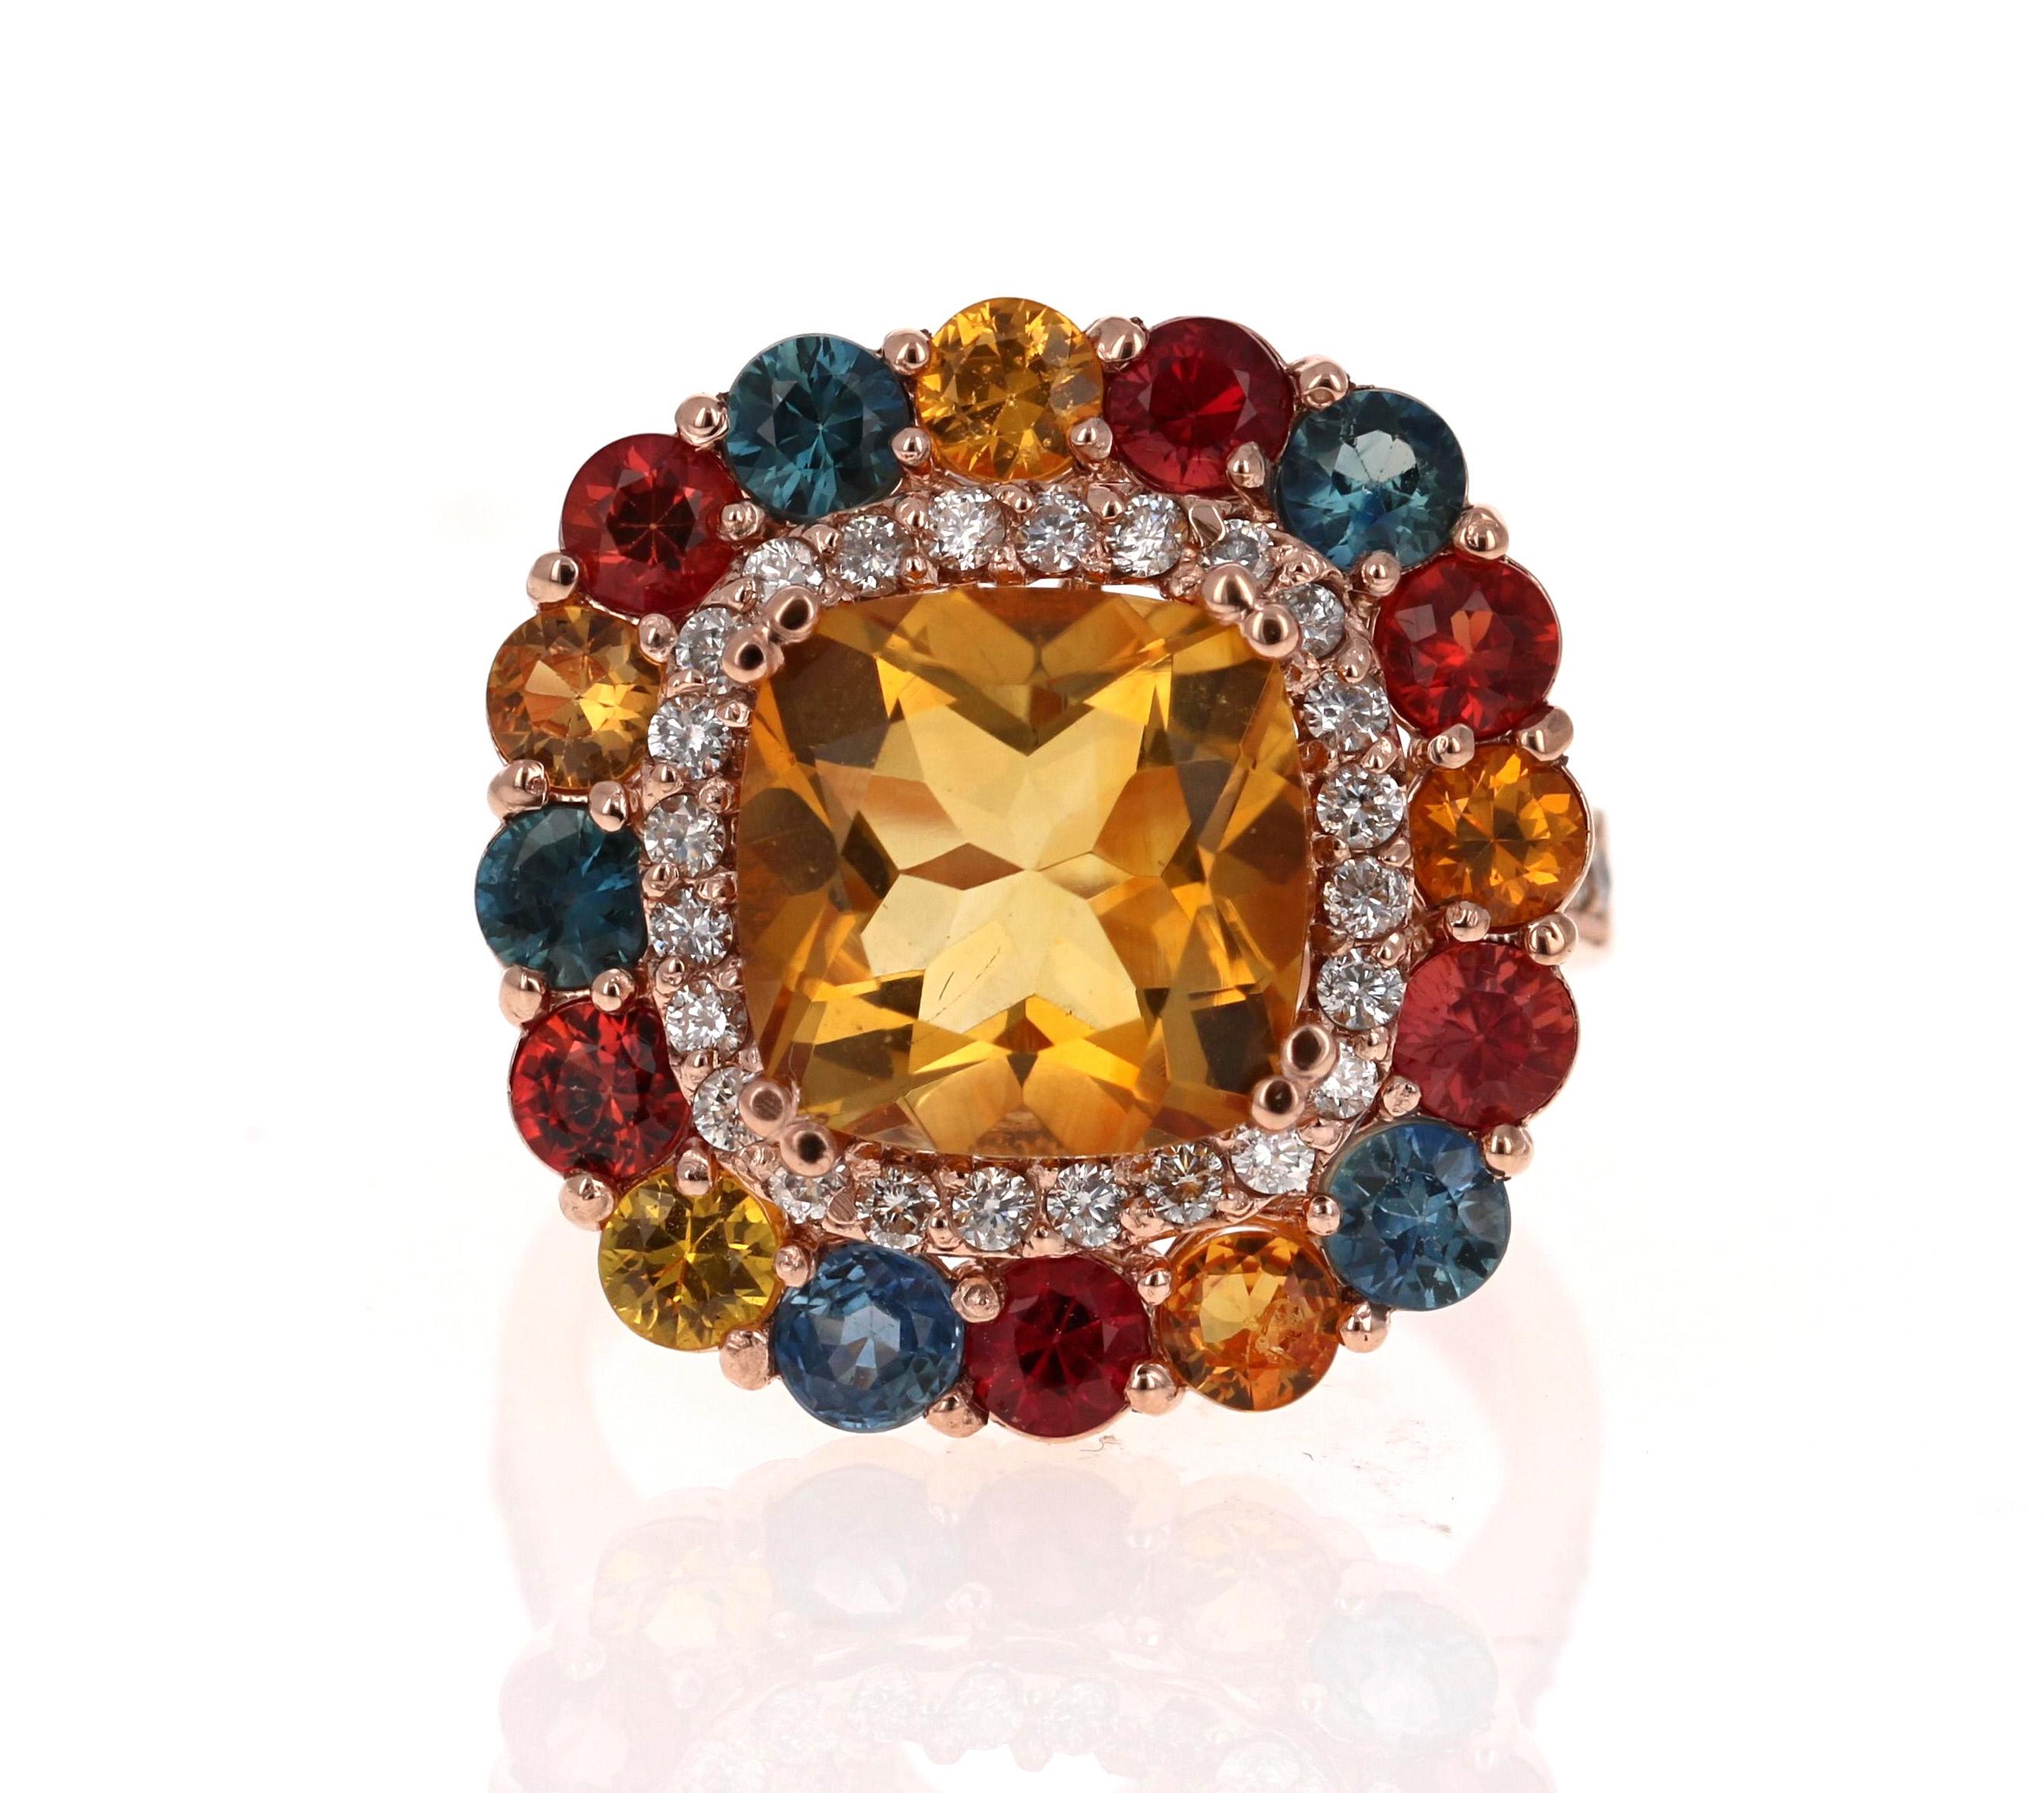 Citrine Quartz, Multi-Colored Sapphires and Diamond Cocktail Ring!   A beautiful and sparkly combination of colorful beauty!

This one of a kind piece has been carefully designed and curated by our in house designer!

This ring has a vibrant Cushion